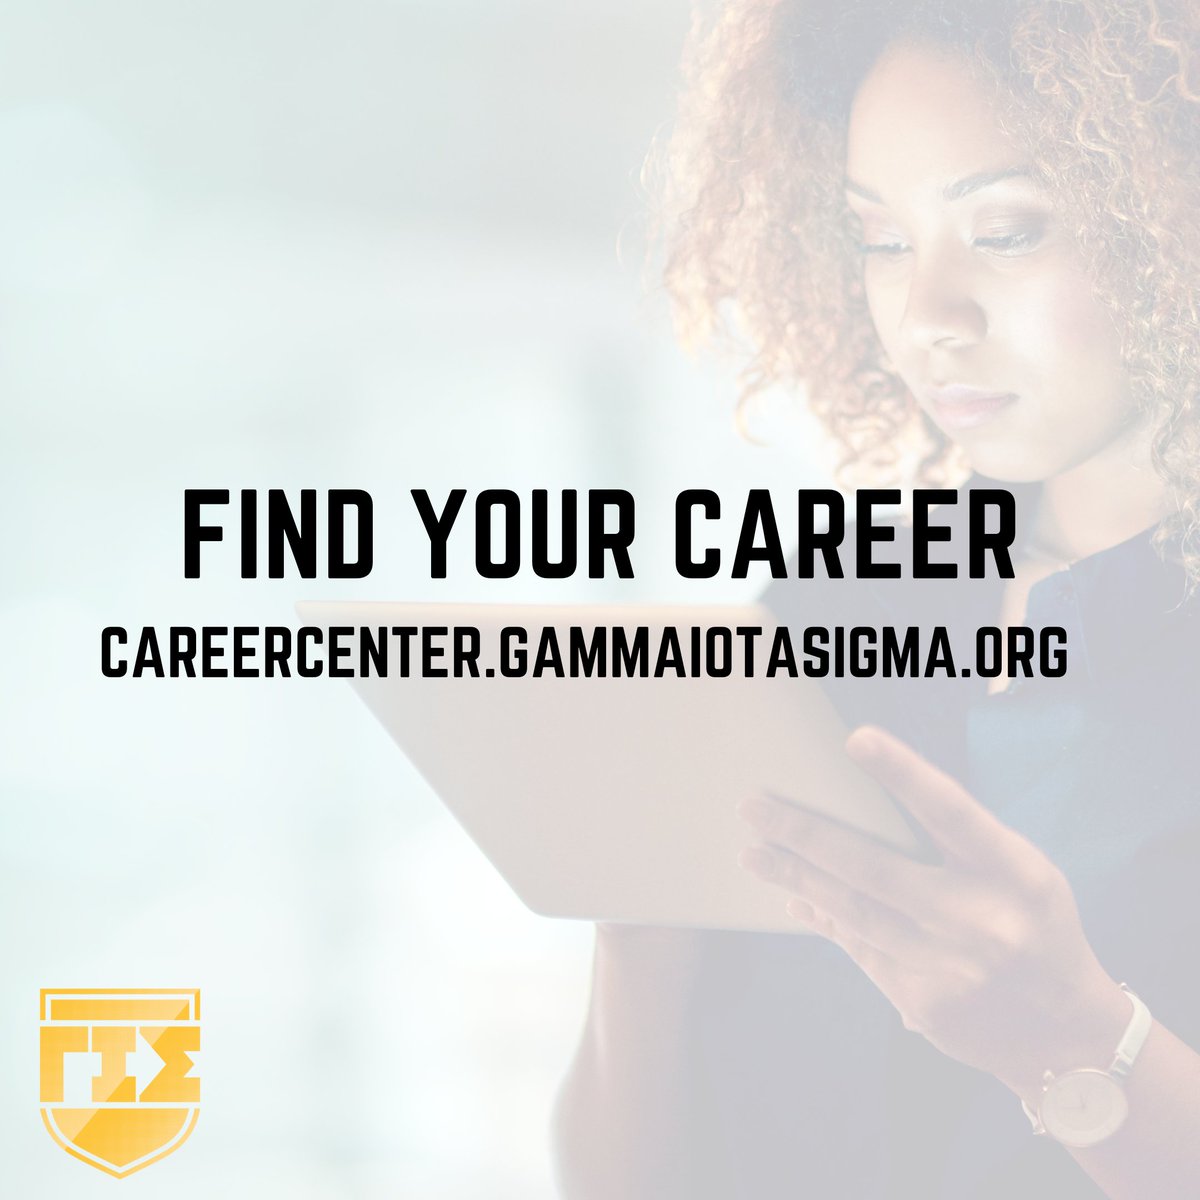 Students, are you looking for a #job? An #internship? Visit the GIS Career Center for newly added career opportunities from Old Republic Specialty Insurance Underwriters, Core Spaces, IPMG, and more! Careercenter.gammaiotasigma.org

#GammaIS #Internships #Jobs #Hiring #TalentPipeline